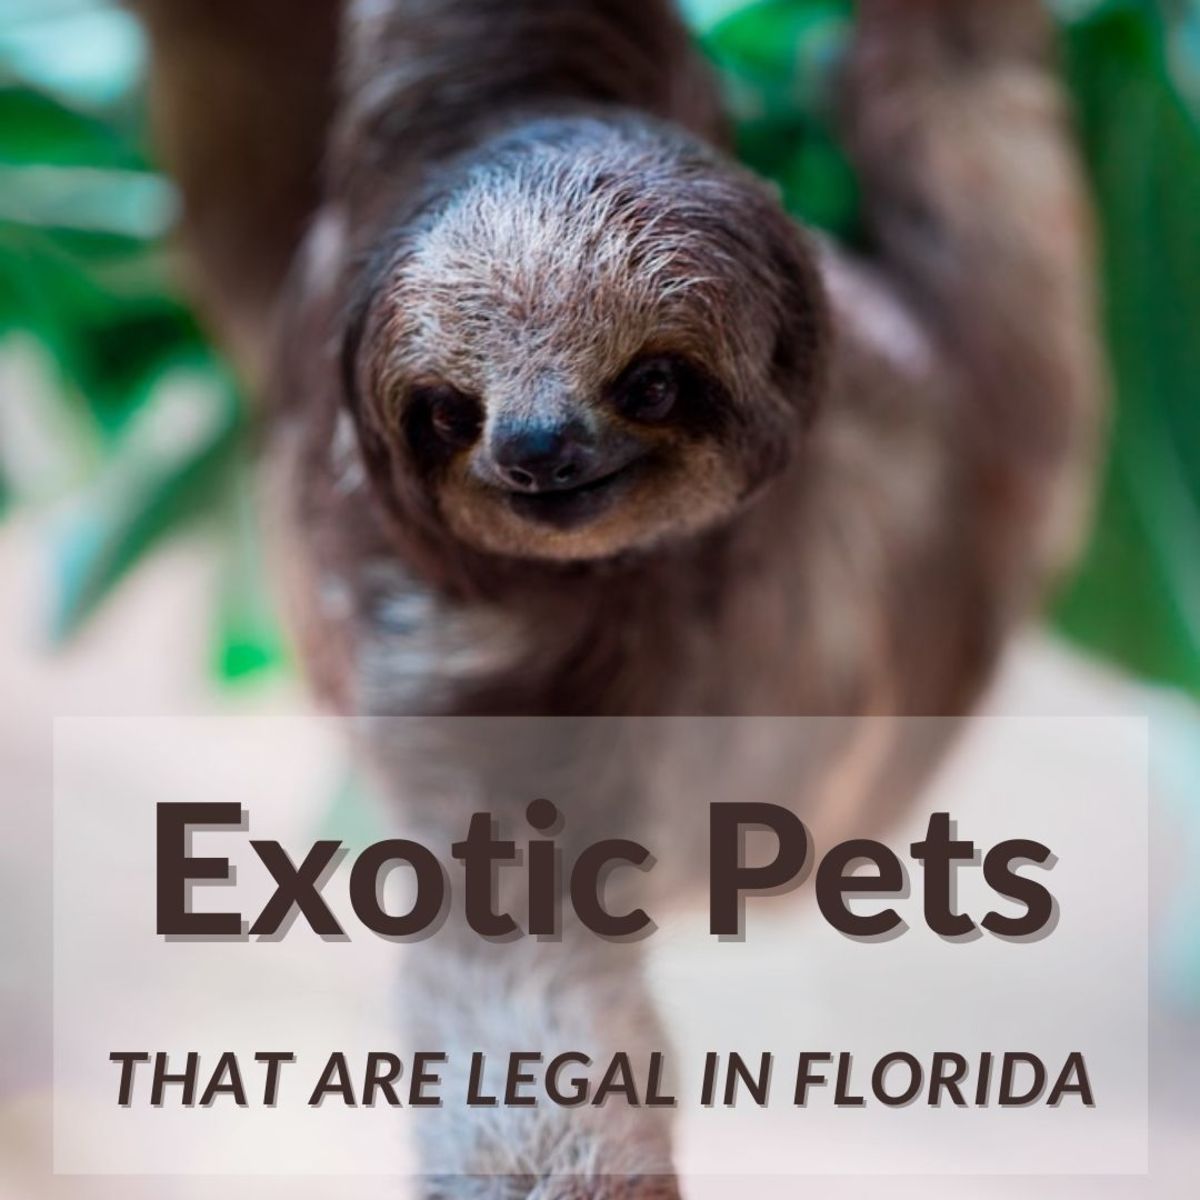 Florida is an unusual state when it comes to exotic pet laws, and there are both good and bad aspects of their regulations.